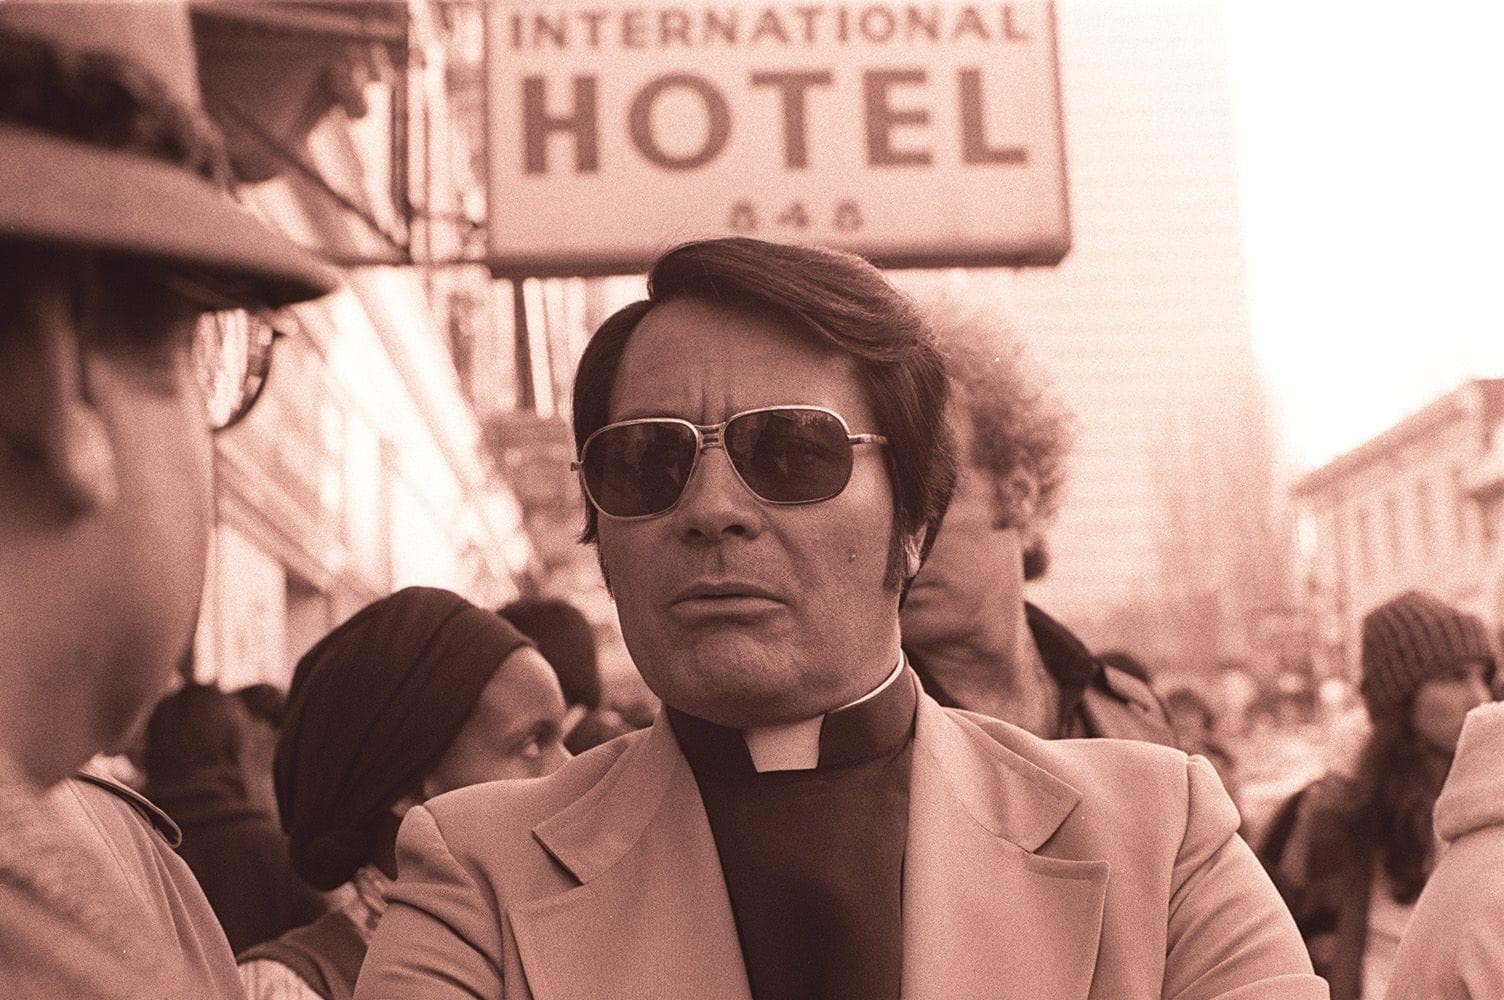 Random Facts About What Happened At Jonestown